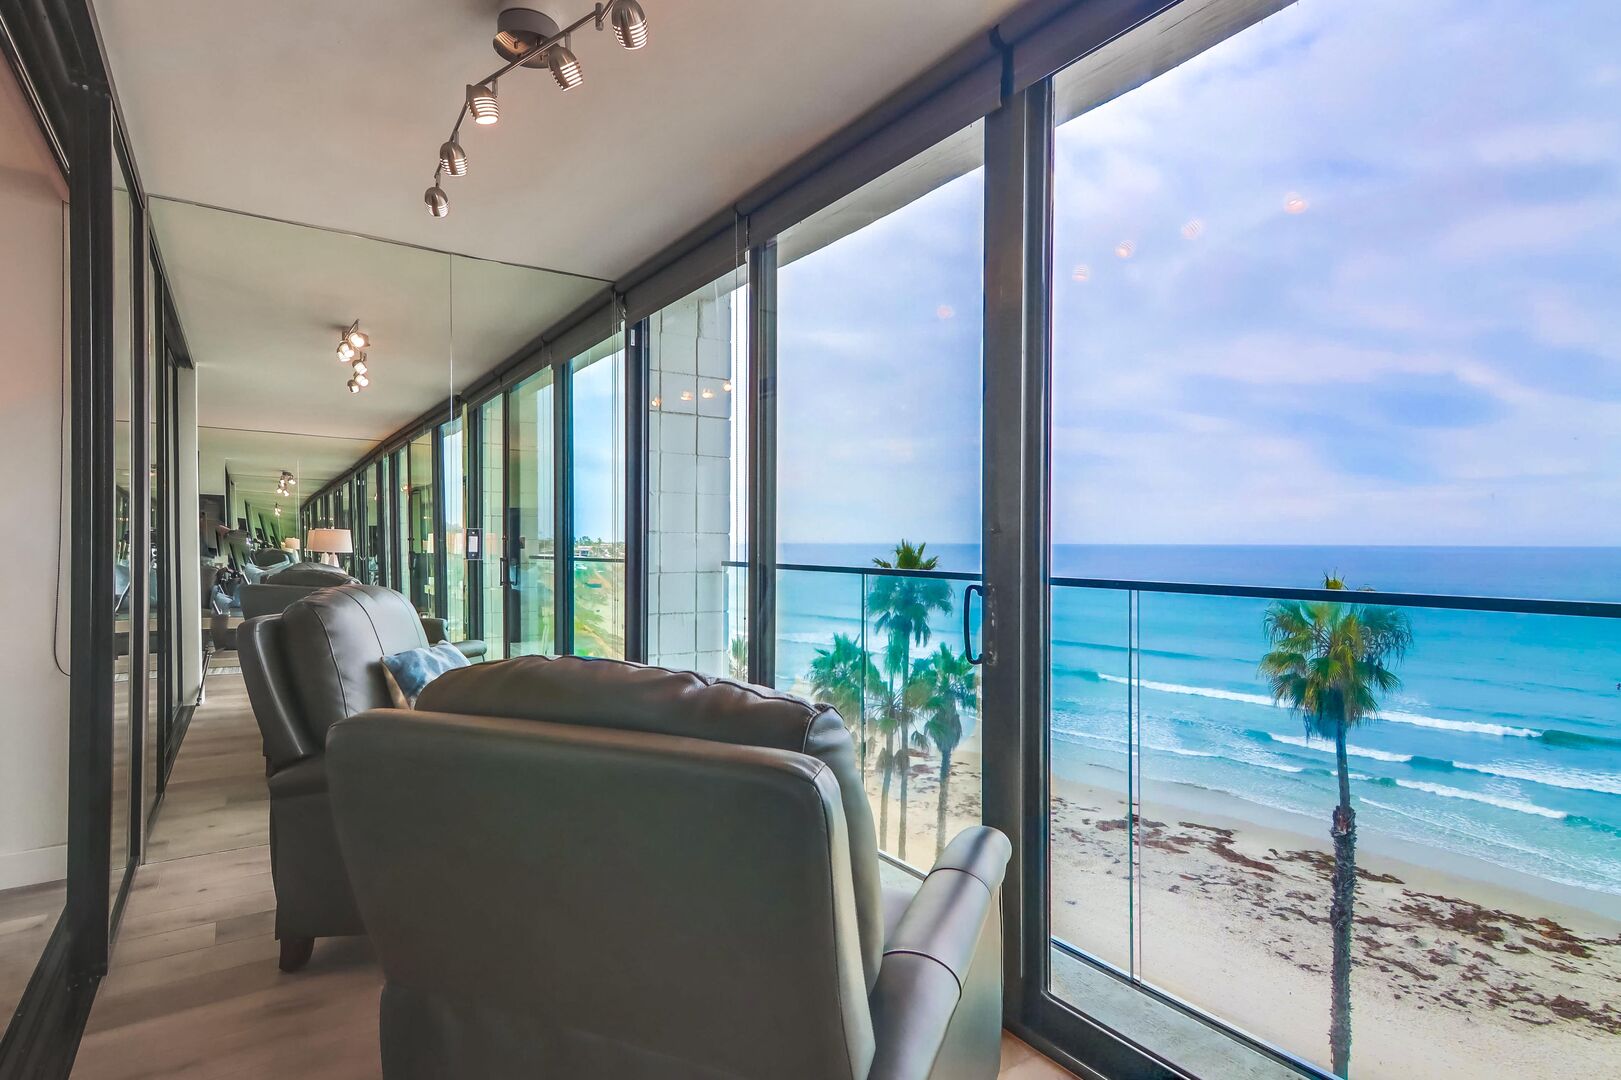 Sliding glass doors open to sea breeze and small standing space by railing. Blinds on all windows and doors are adjusted by a pulley chain.